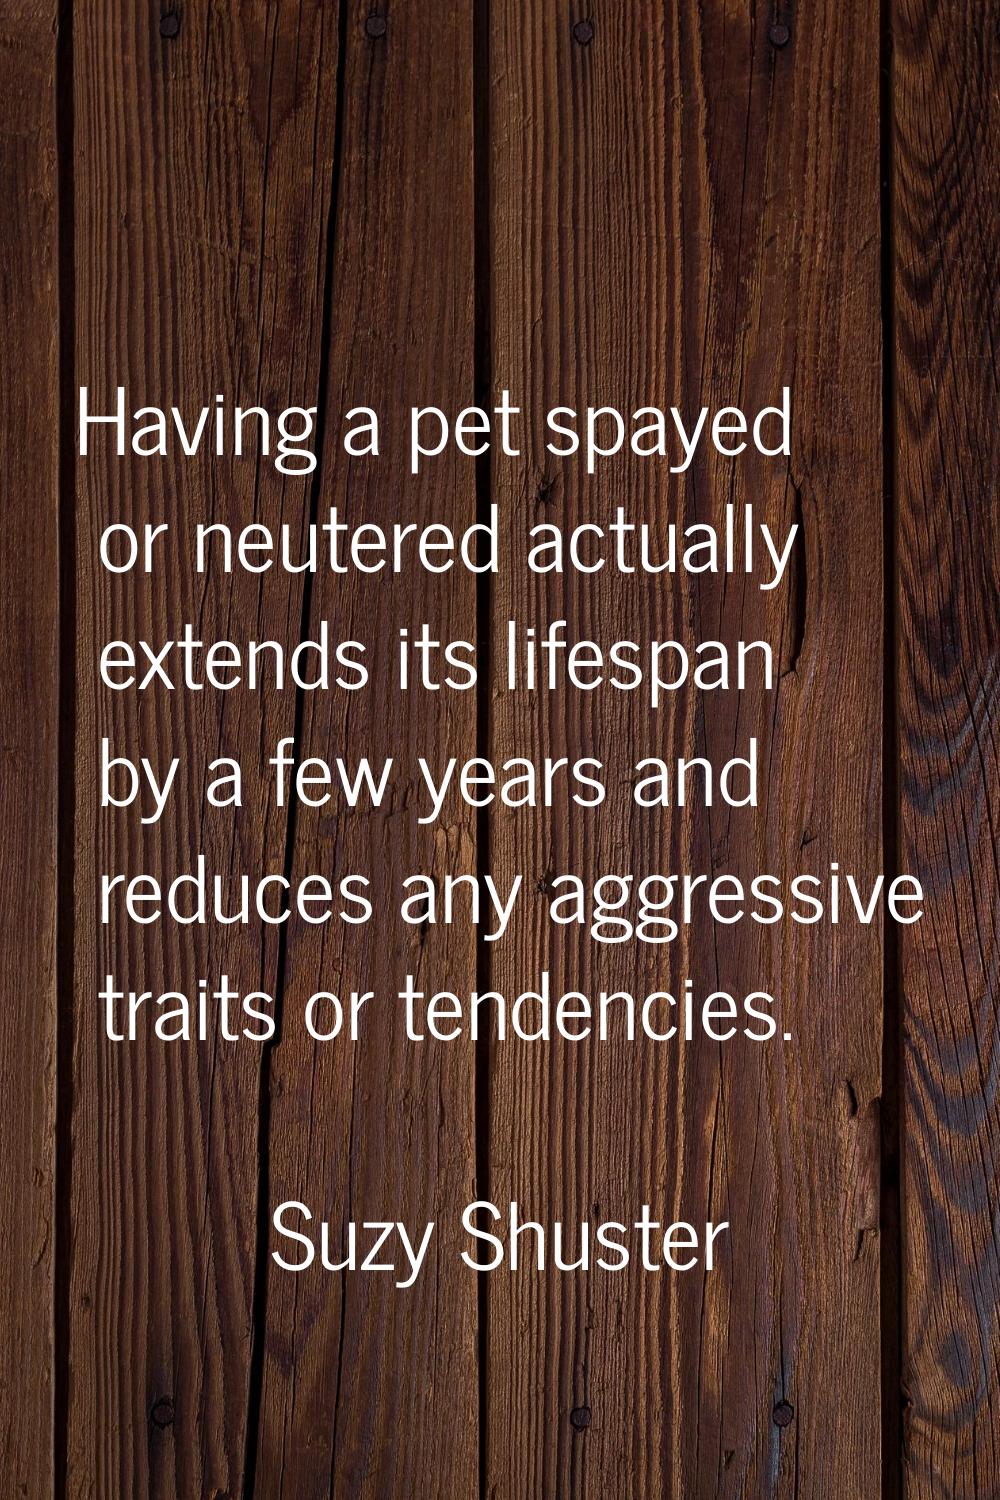 Having a pet spayed or neutered actually extends its lifespan by a few years and reduces any aggres